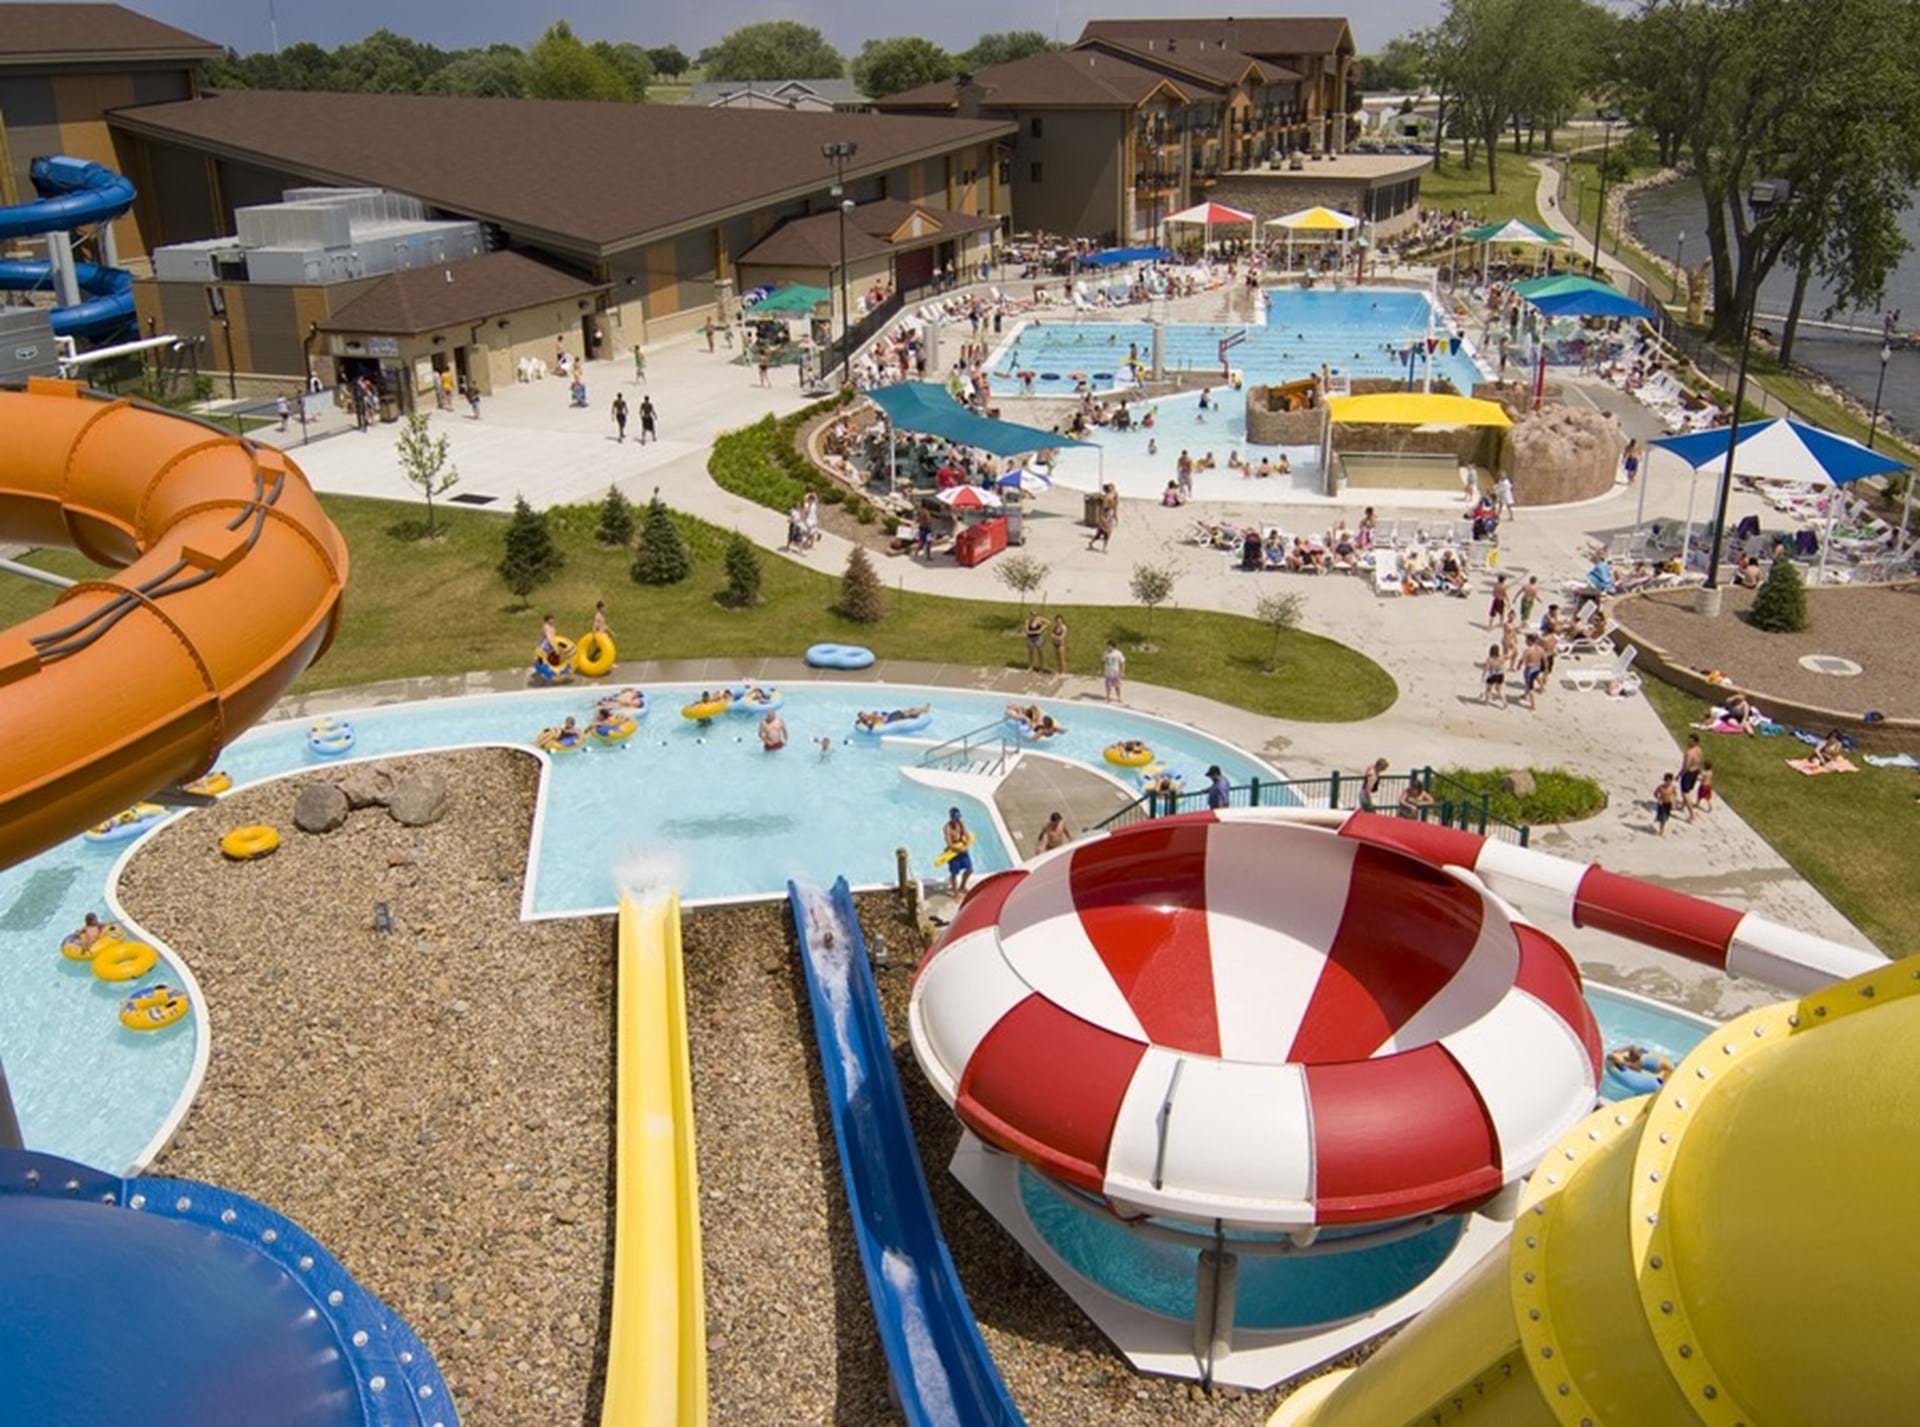 King's Pointe Waterpark